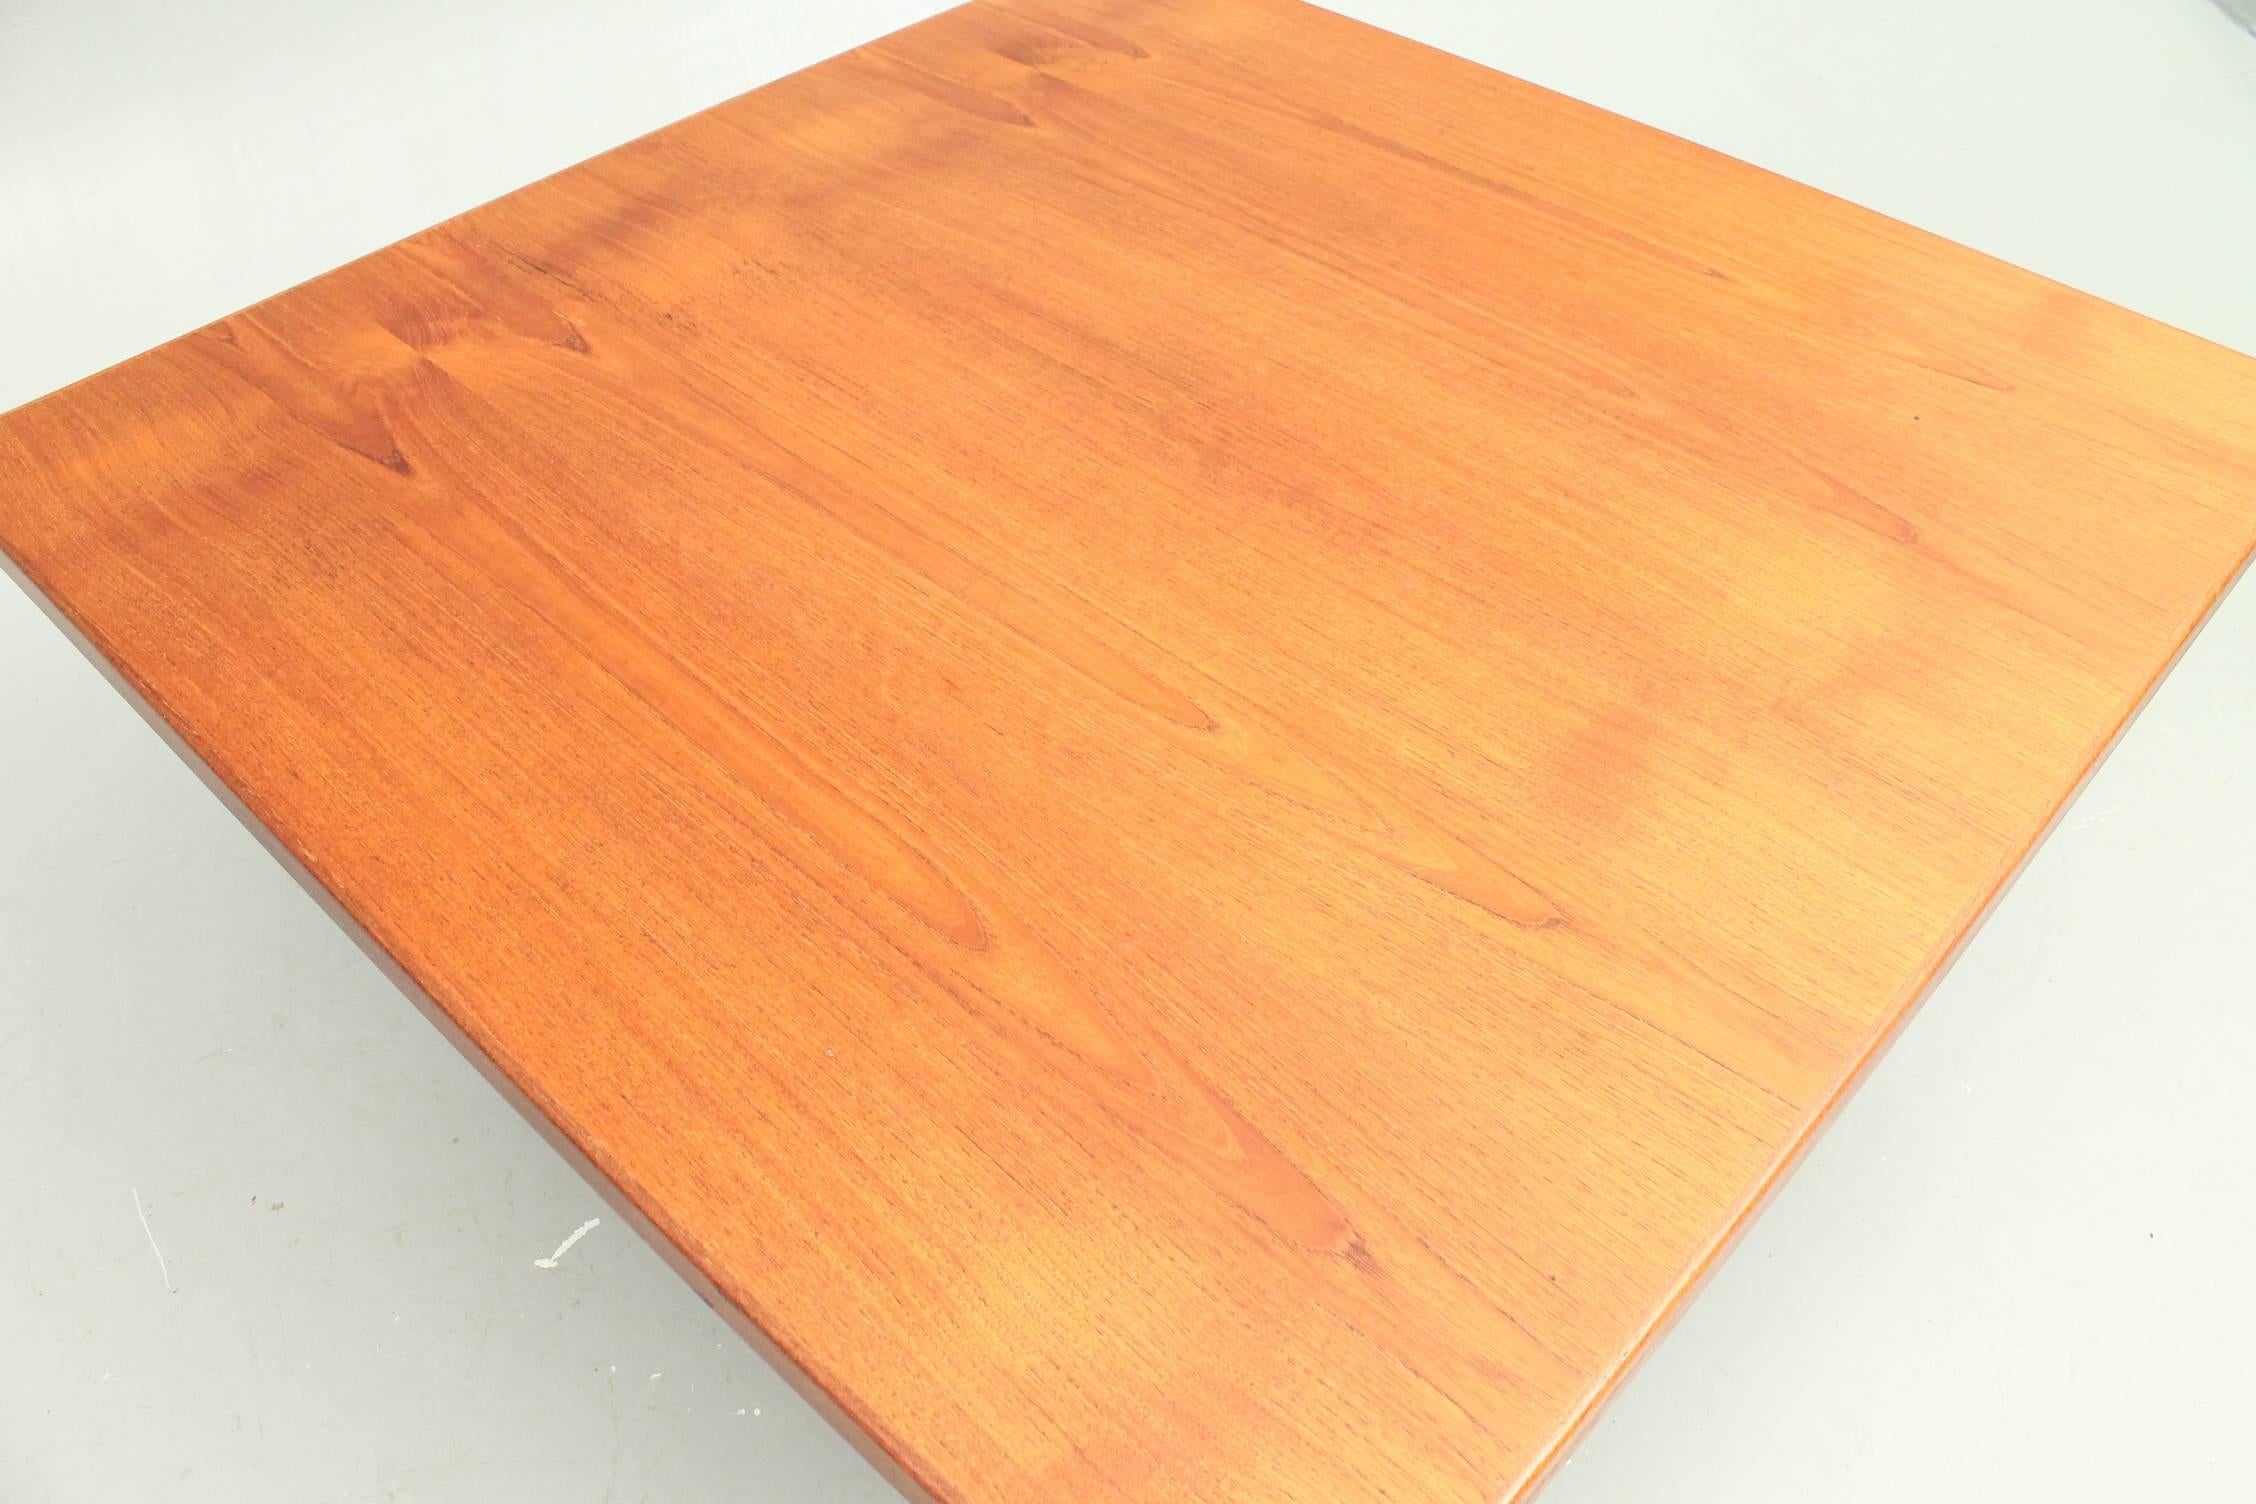 Beautiful Finn Juhl FJ57 coffee table manufactured by Niels Vodder. This table features a square teak top mounted on an anodized steel frame with teak shoes at the bottom of the base. The table is in excellent condition and the tabletop has been